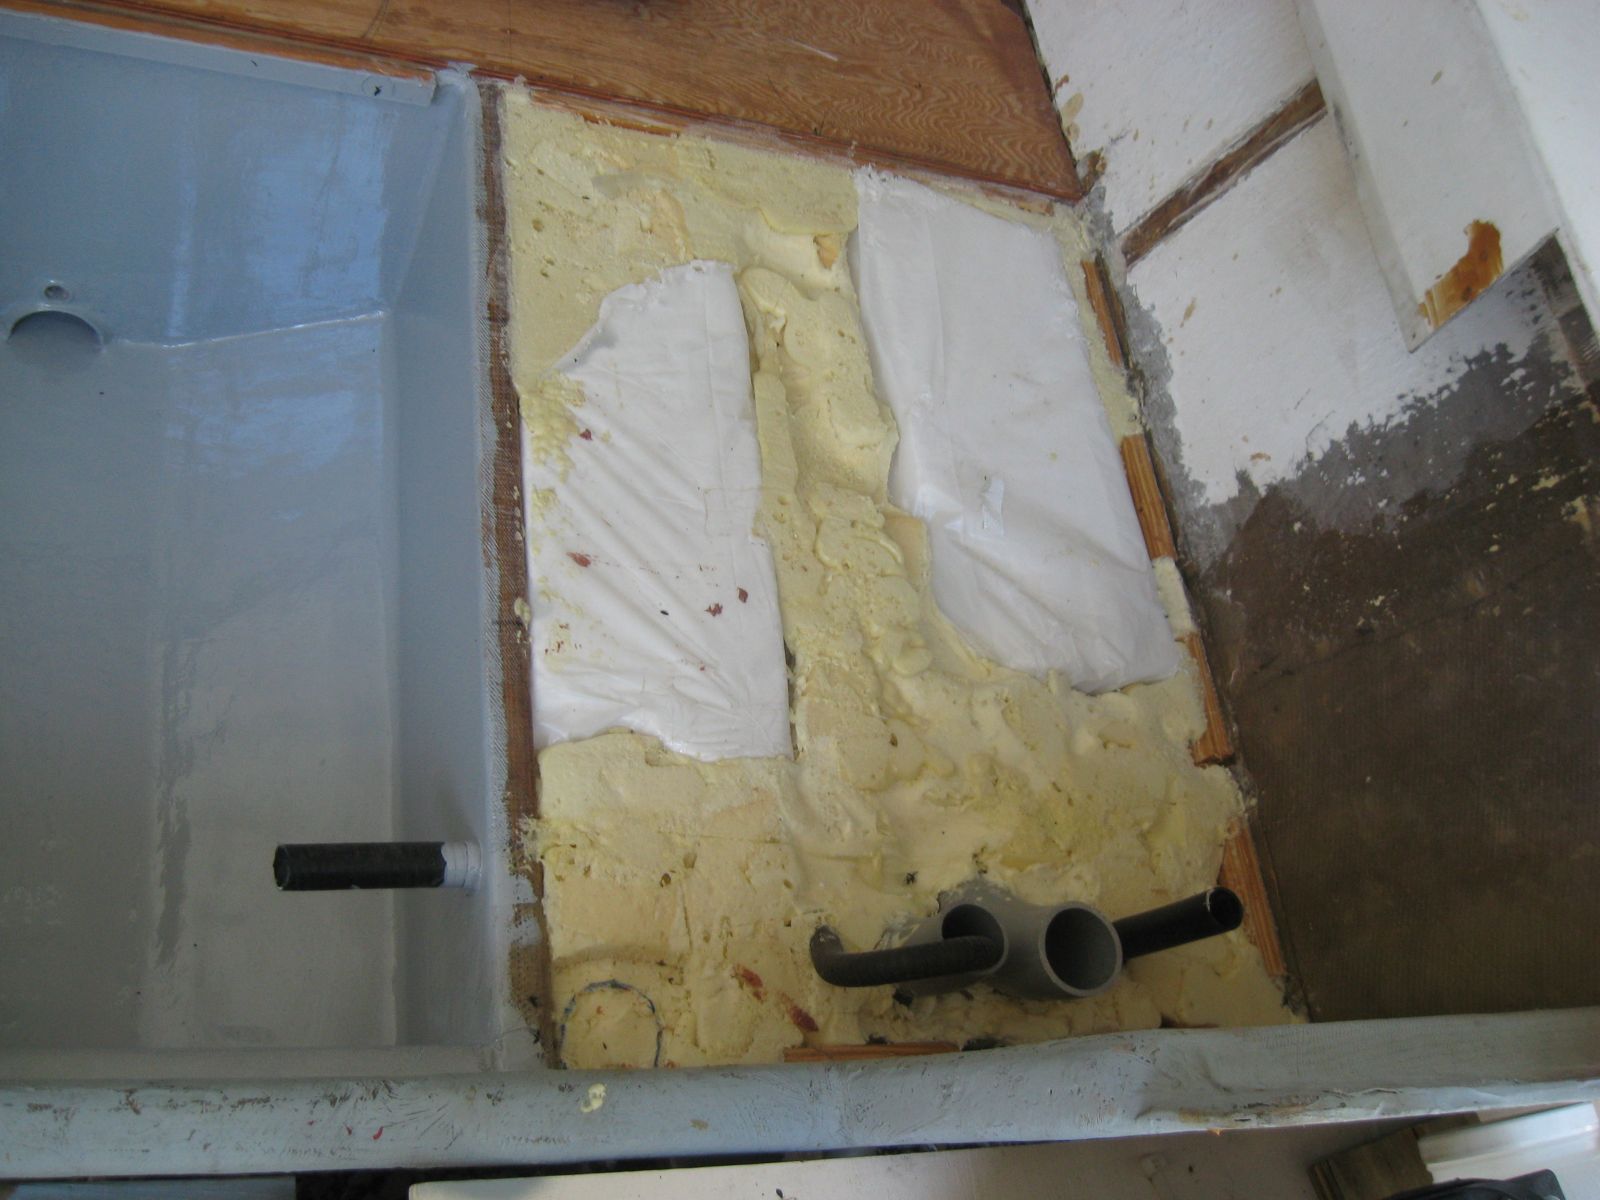 Starboard side rear foamed in
plastic wrapped bead foam blocks visible in pic used to take up space...
